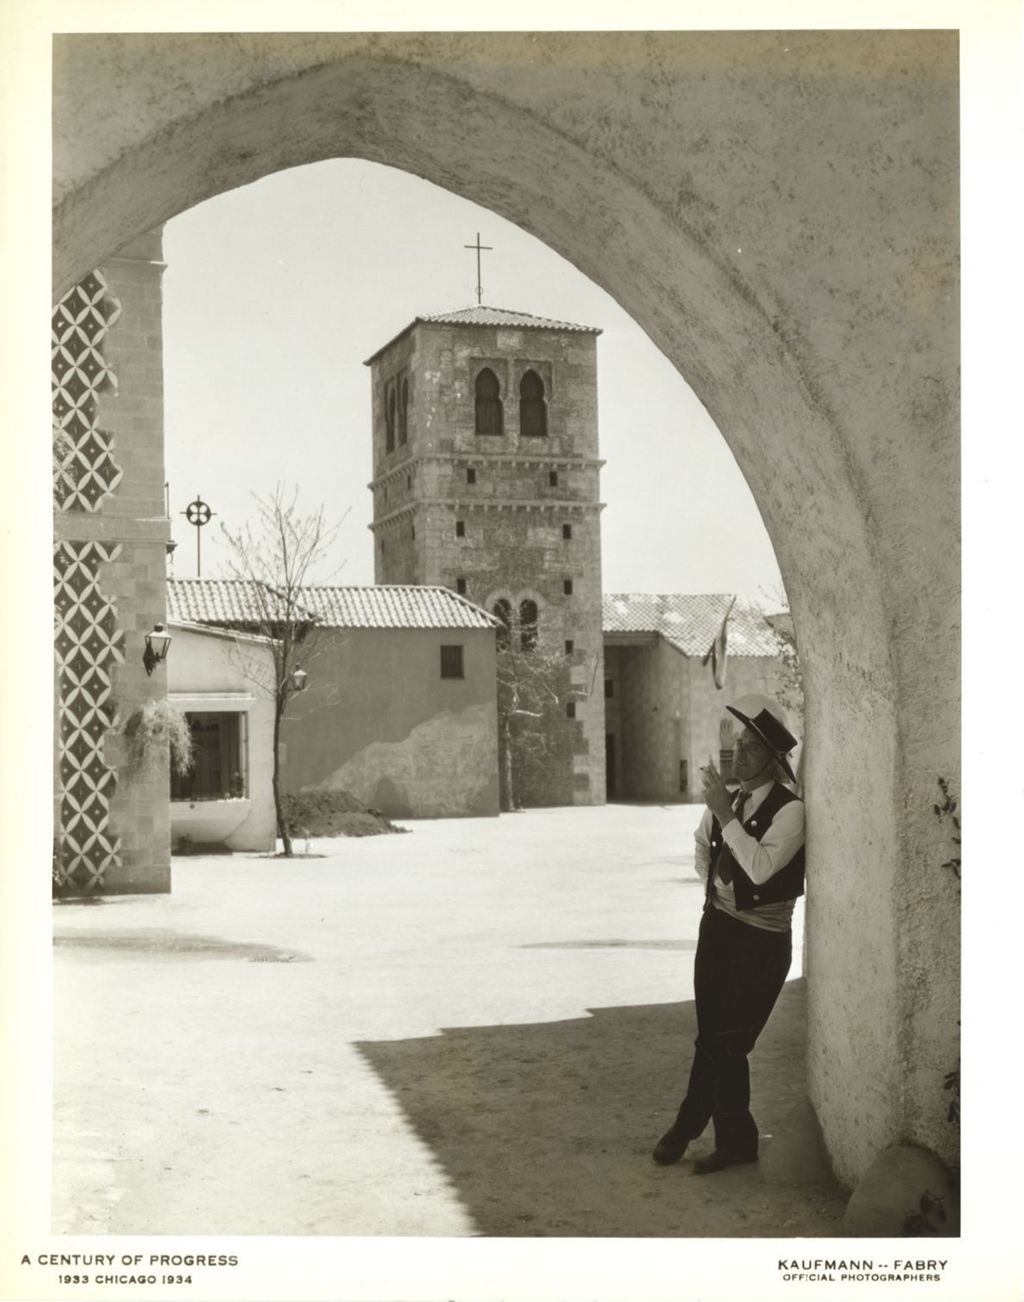 Miniature of Man in costume standing underneath an archway at the Century of Progress Spanish Village.